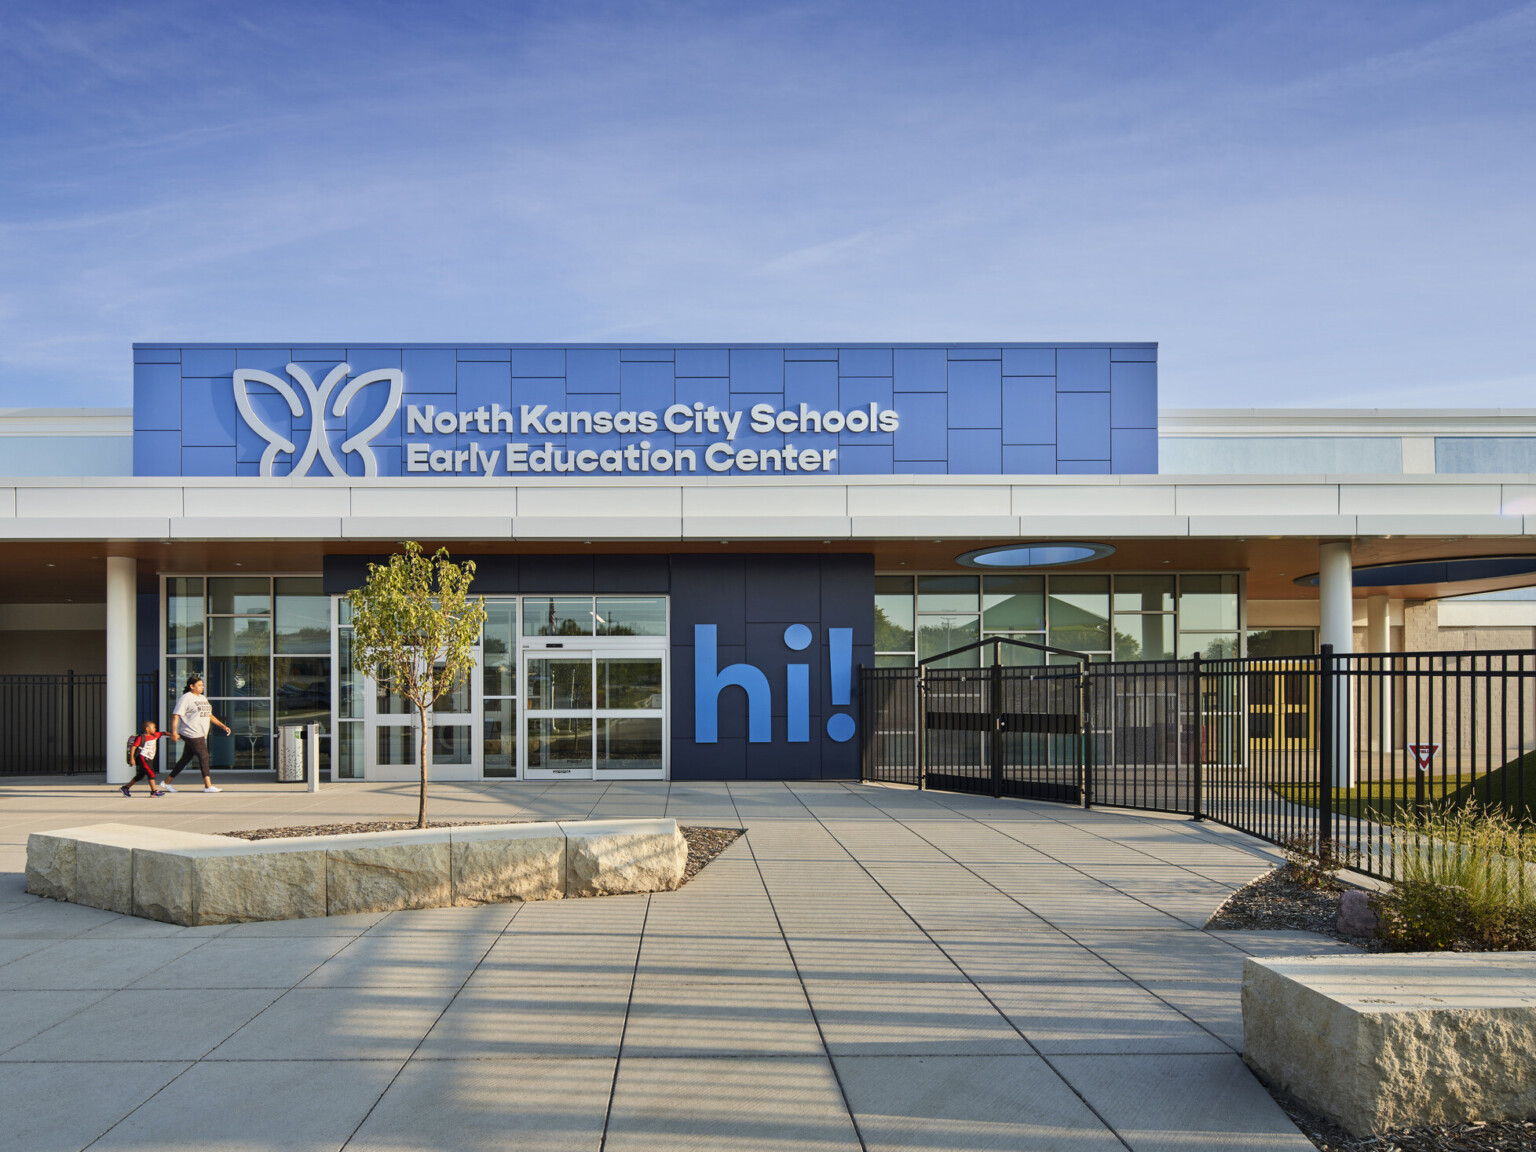 North Kansas City School Early Education Center exterior, a two tone blue facade, large "Hi!" mural by entry